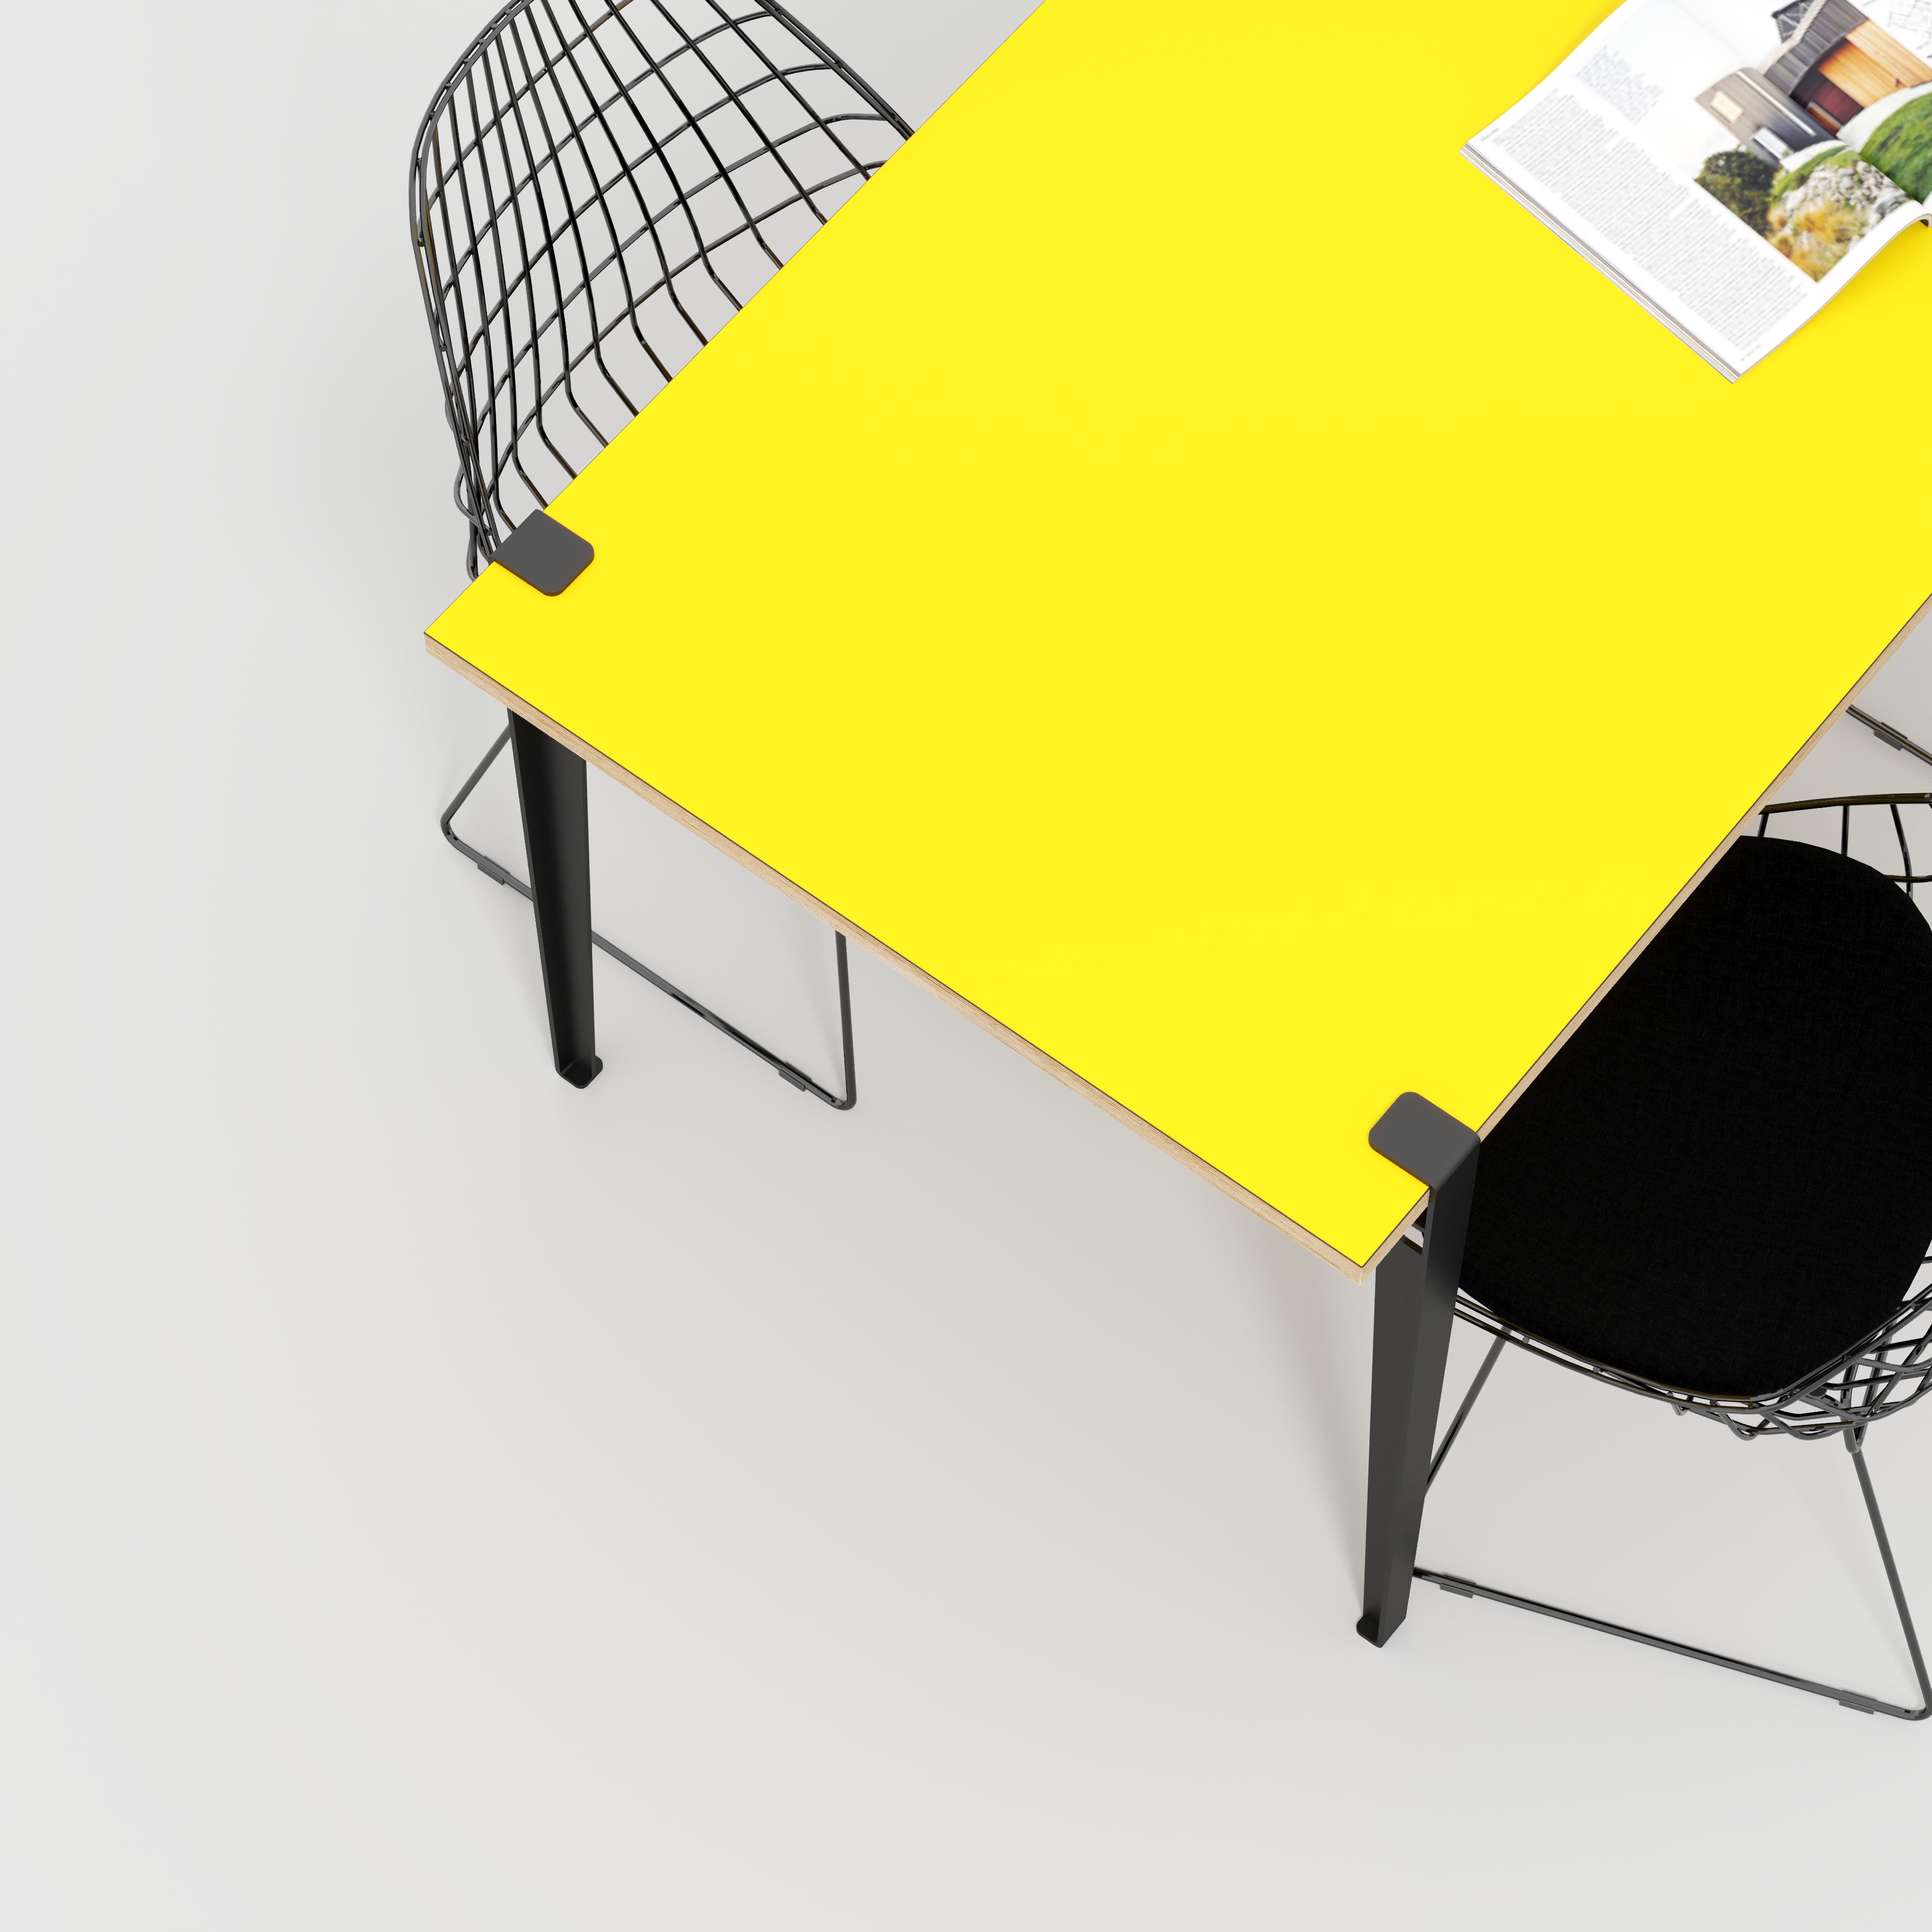 Table with Black Tiptoe Legs - Formica Chrome Yellow - 1600(w) x 800(d) x 750(h)